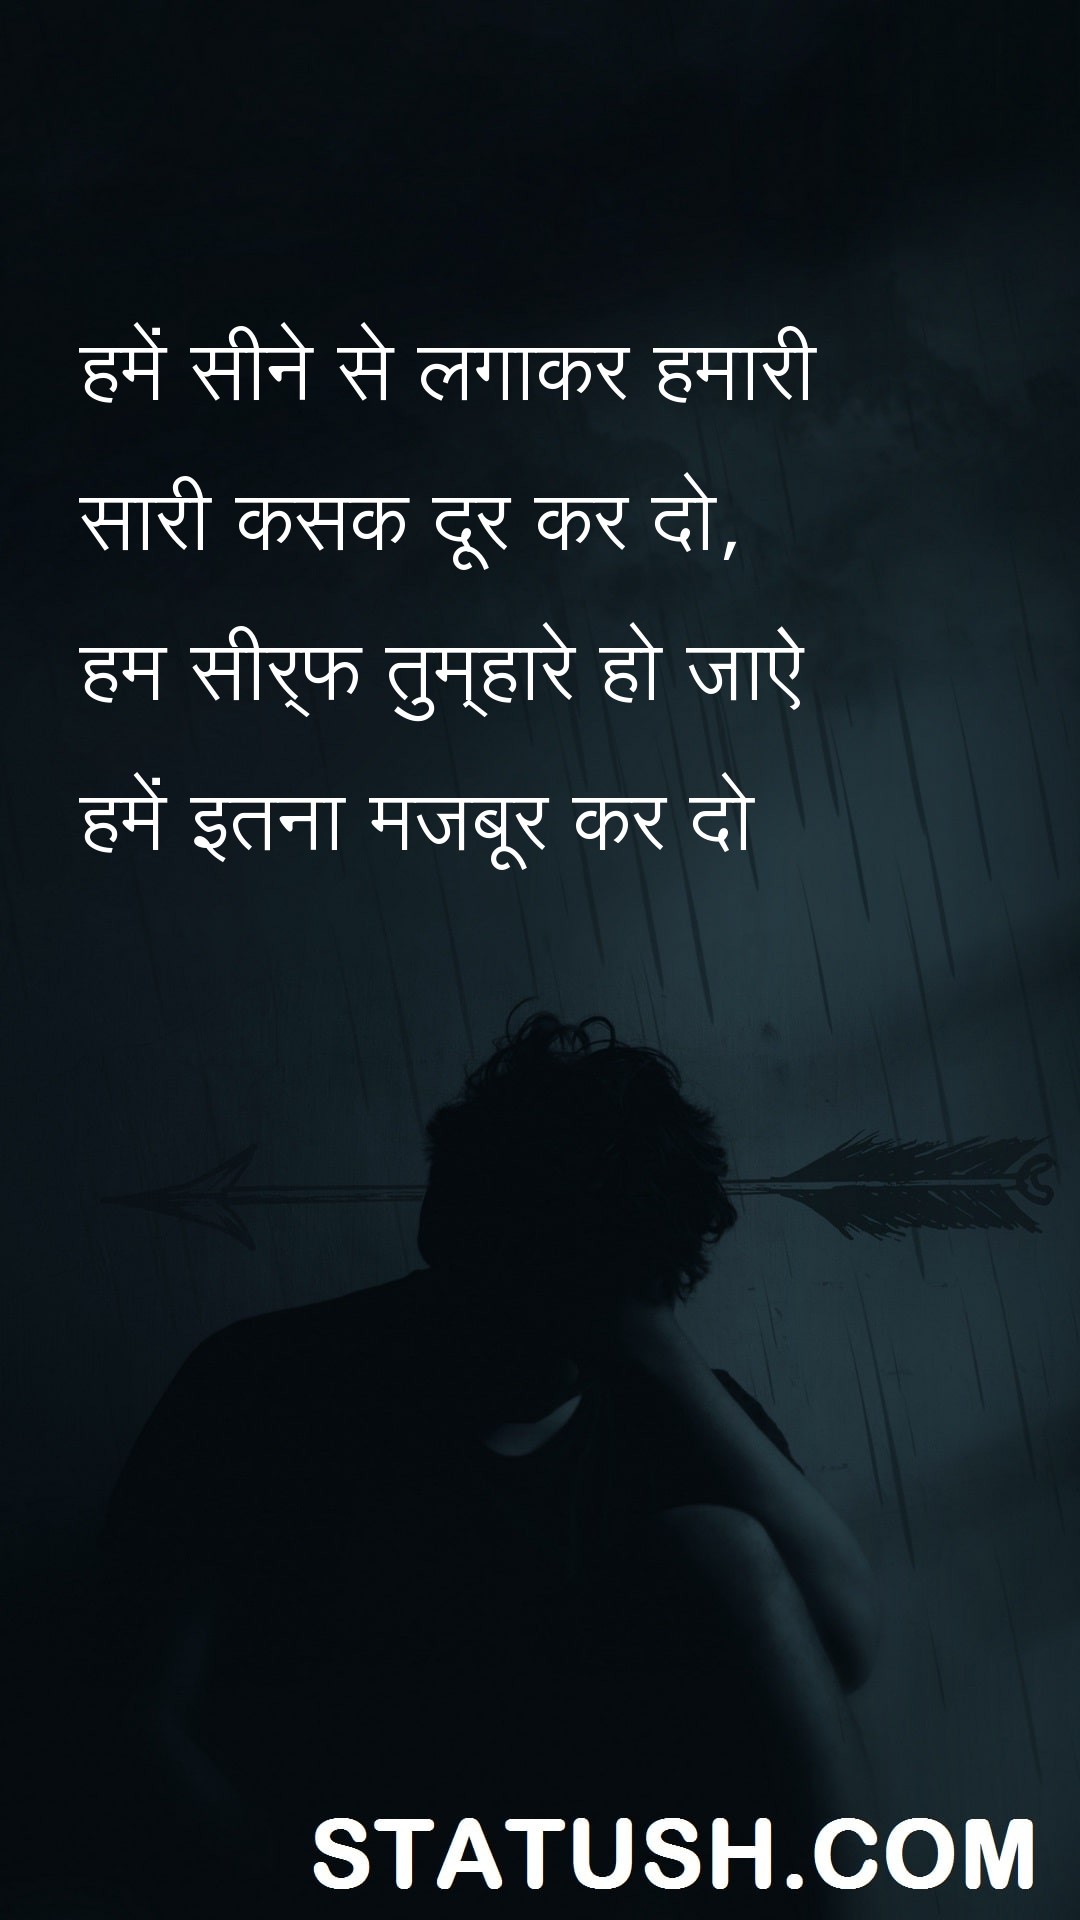 Remove all our tightness by attaching Shayri Quotes at statush.com